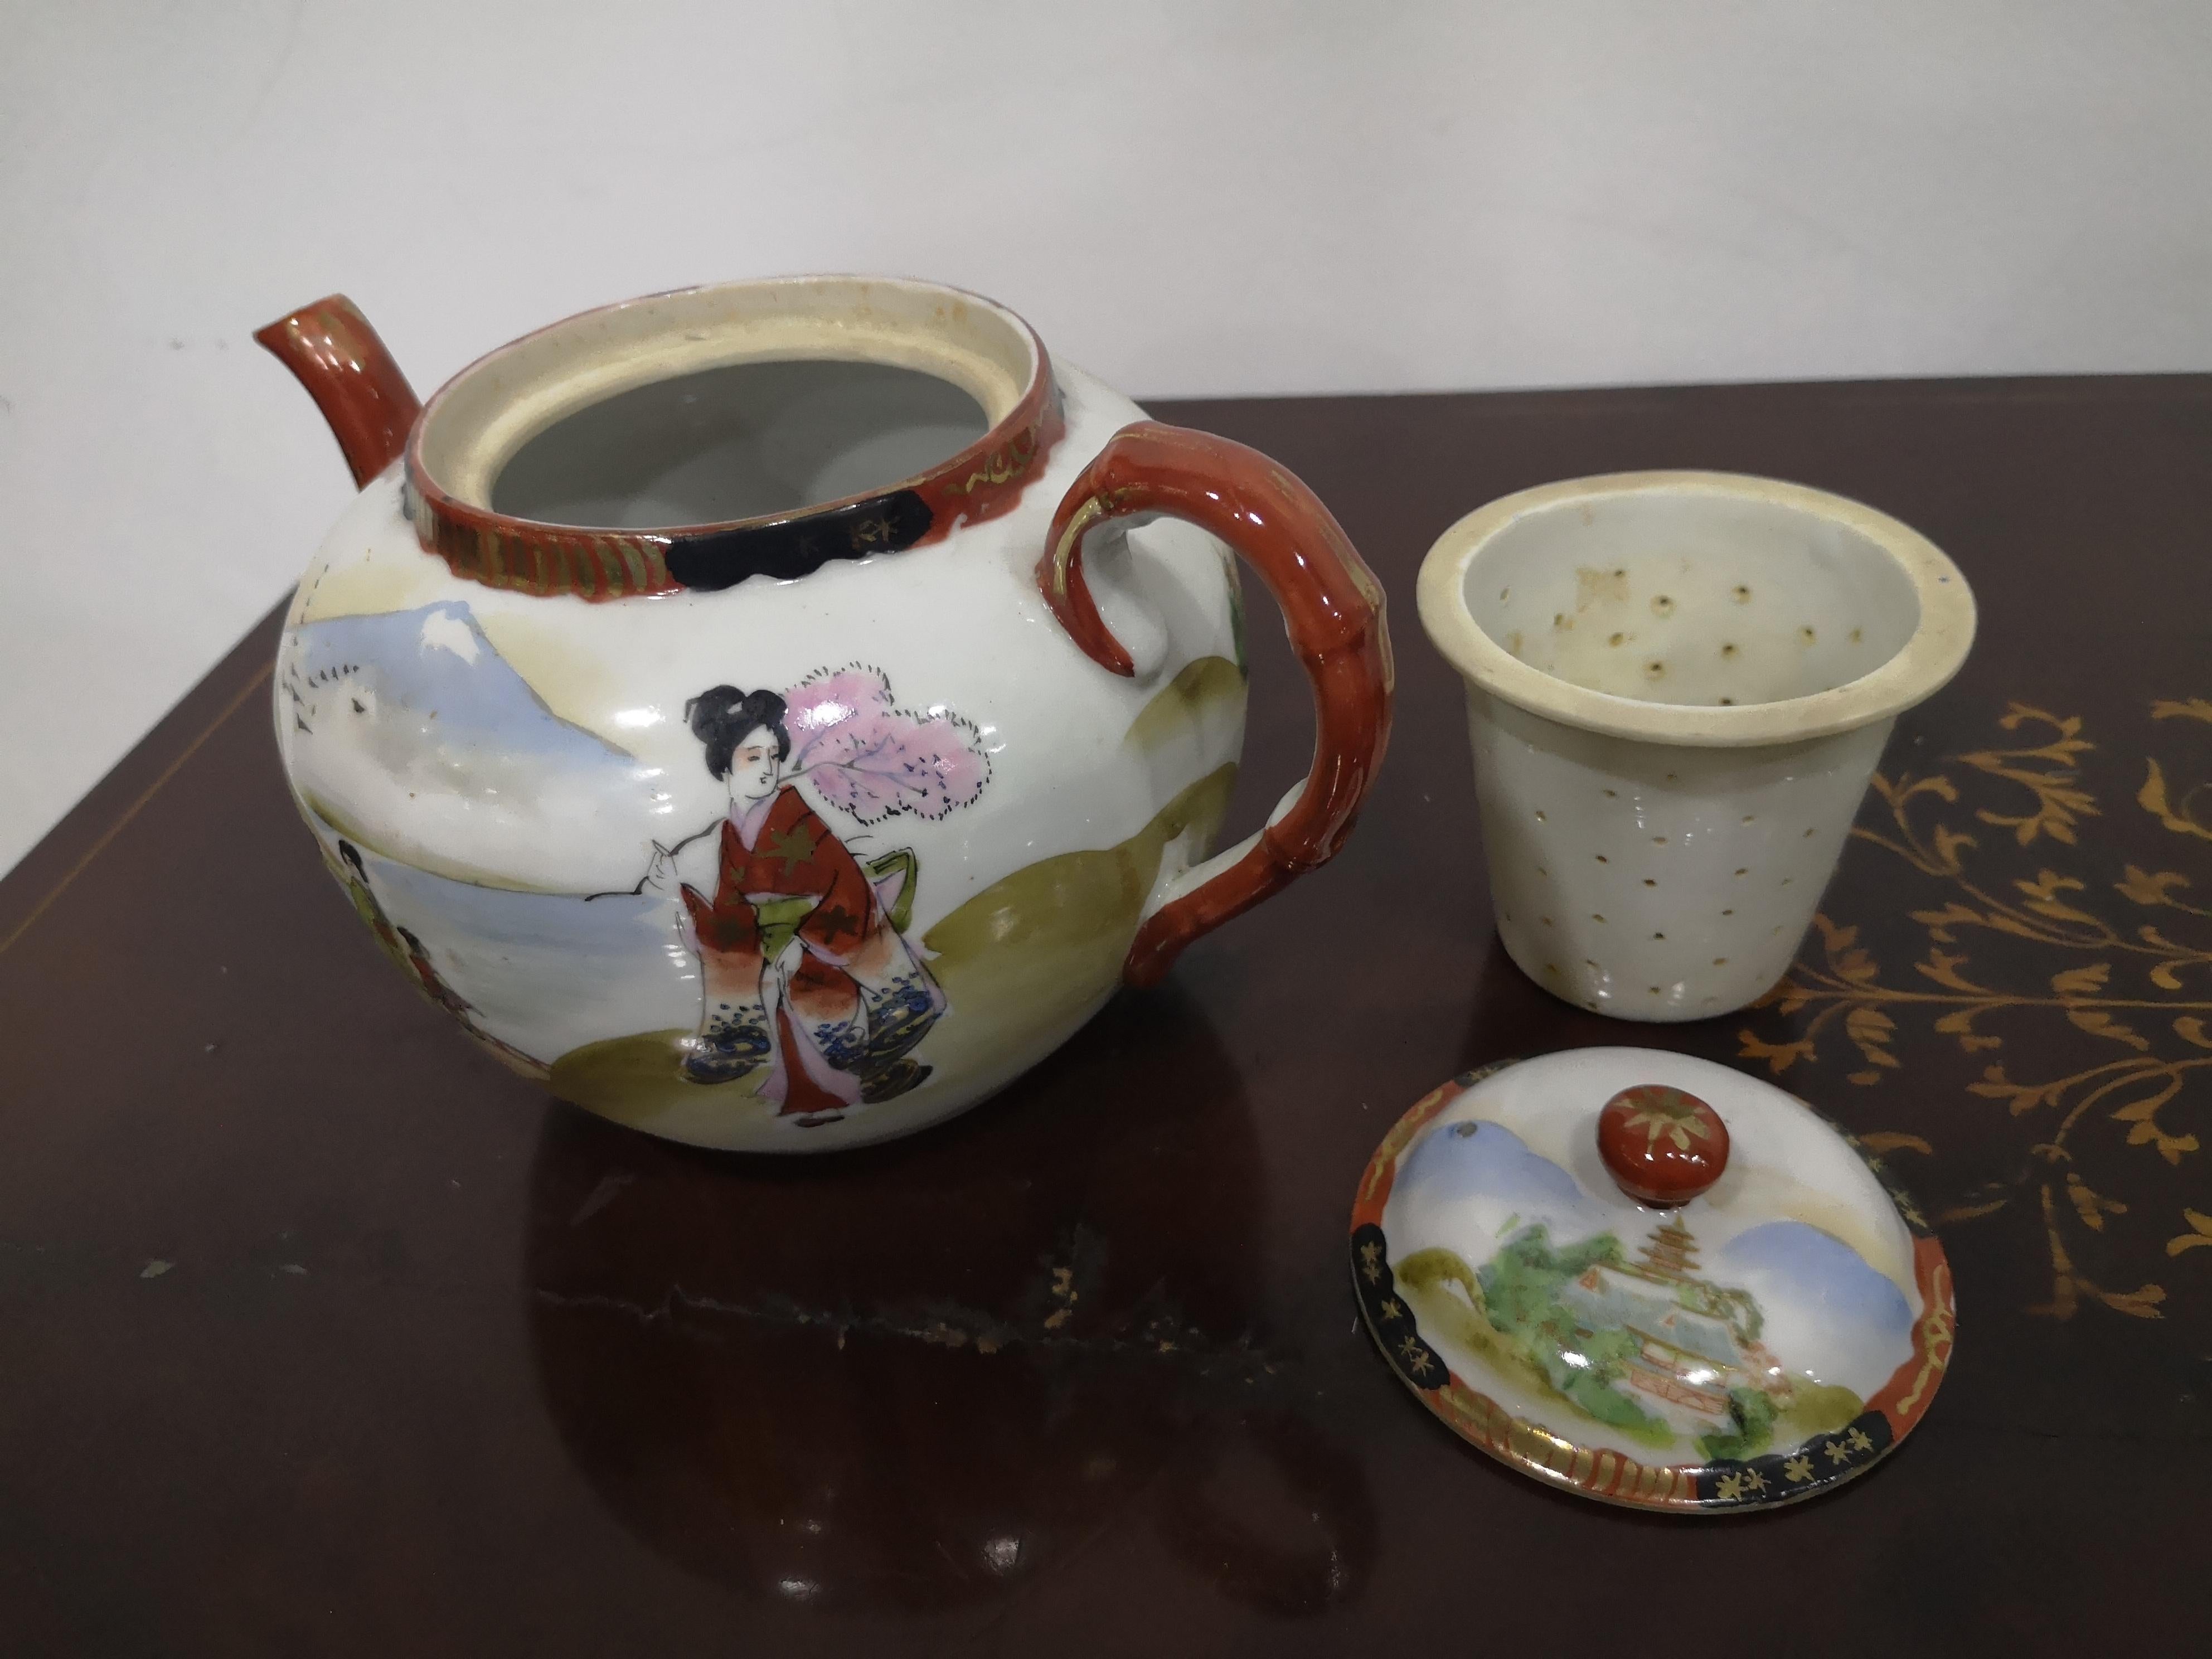 Japanese tea service for 10 in fine mid-19th century porcelain For Sale 12